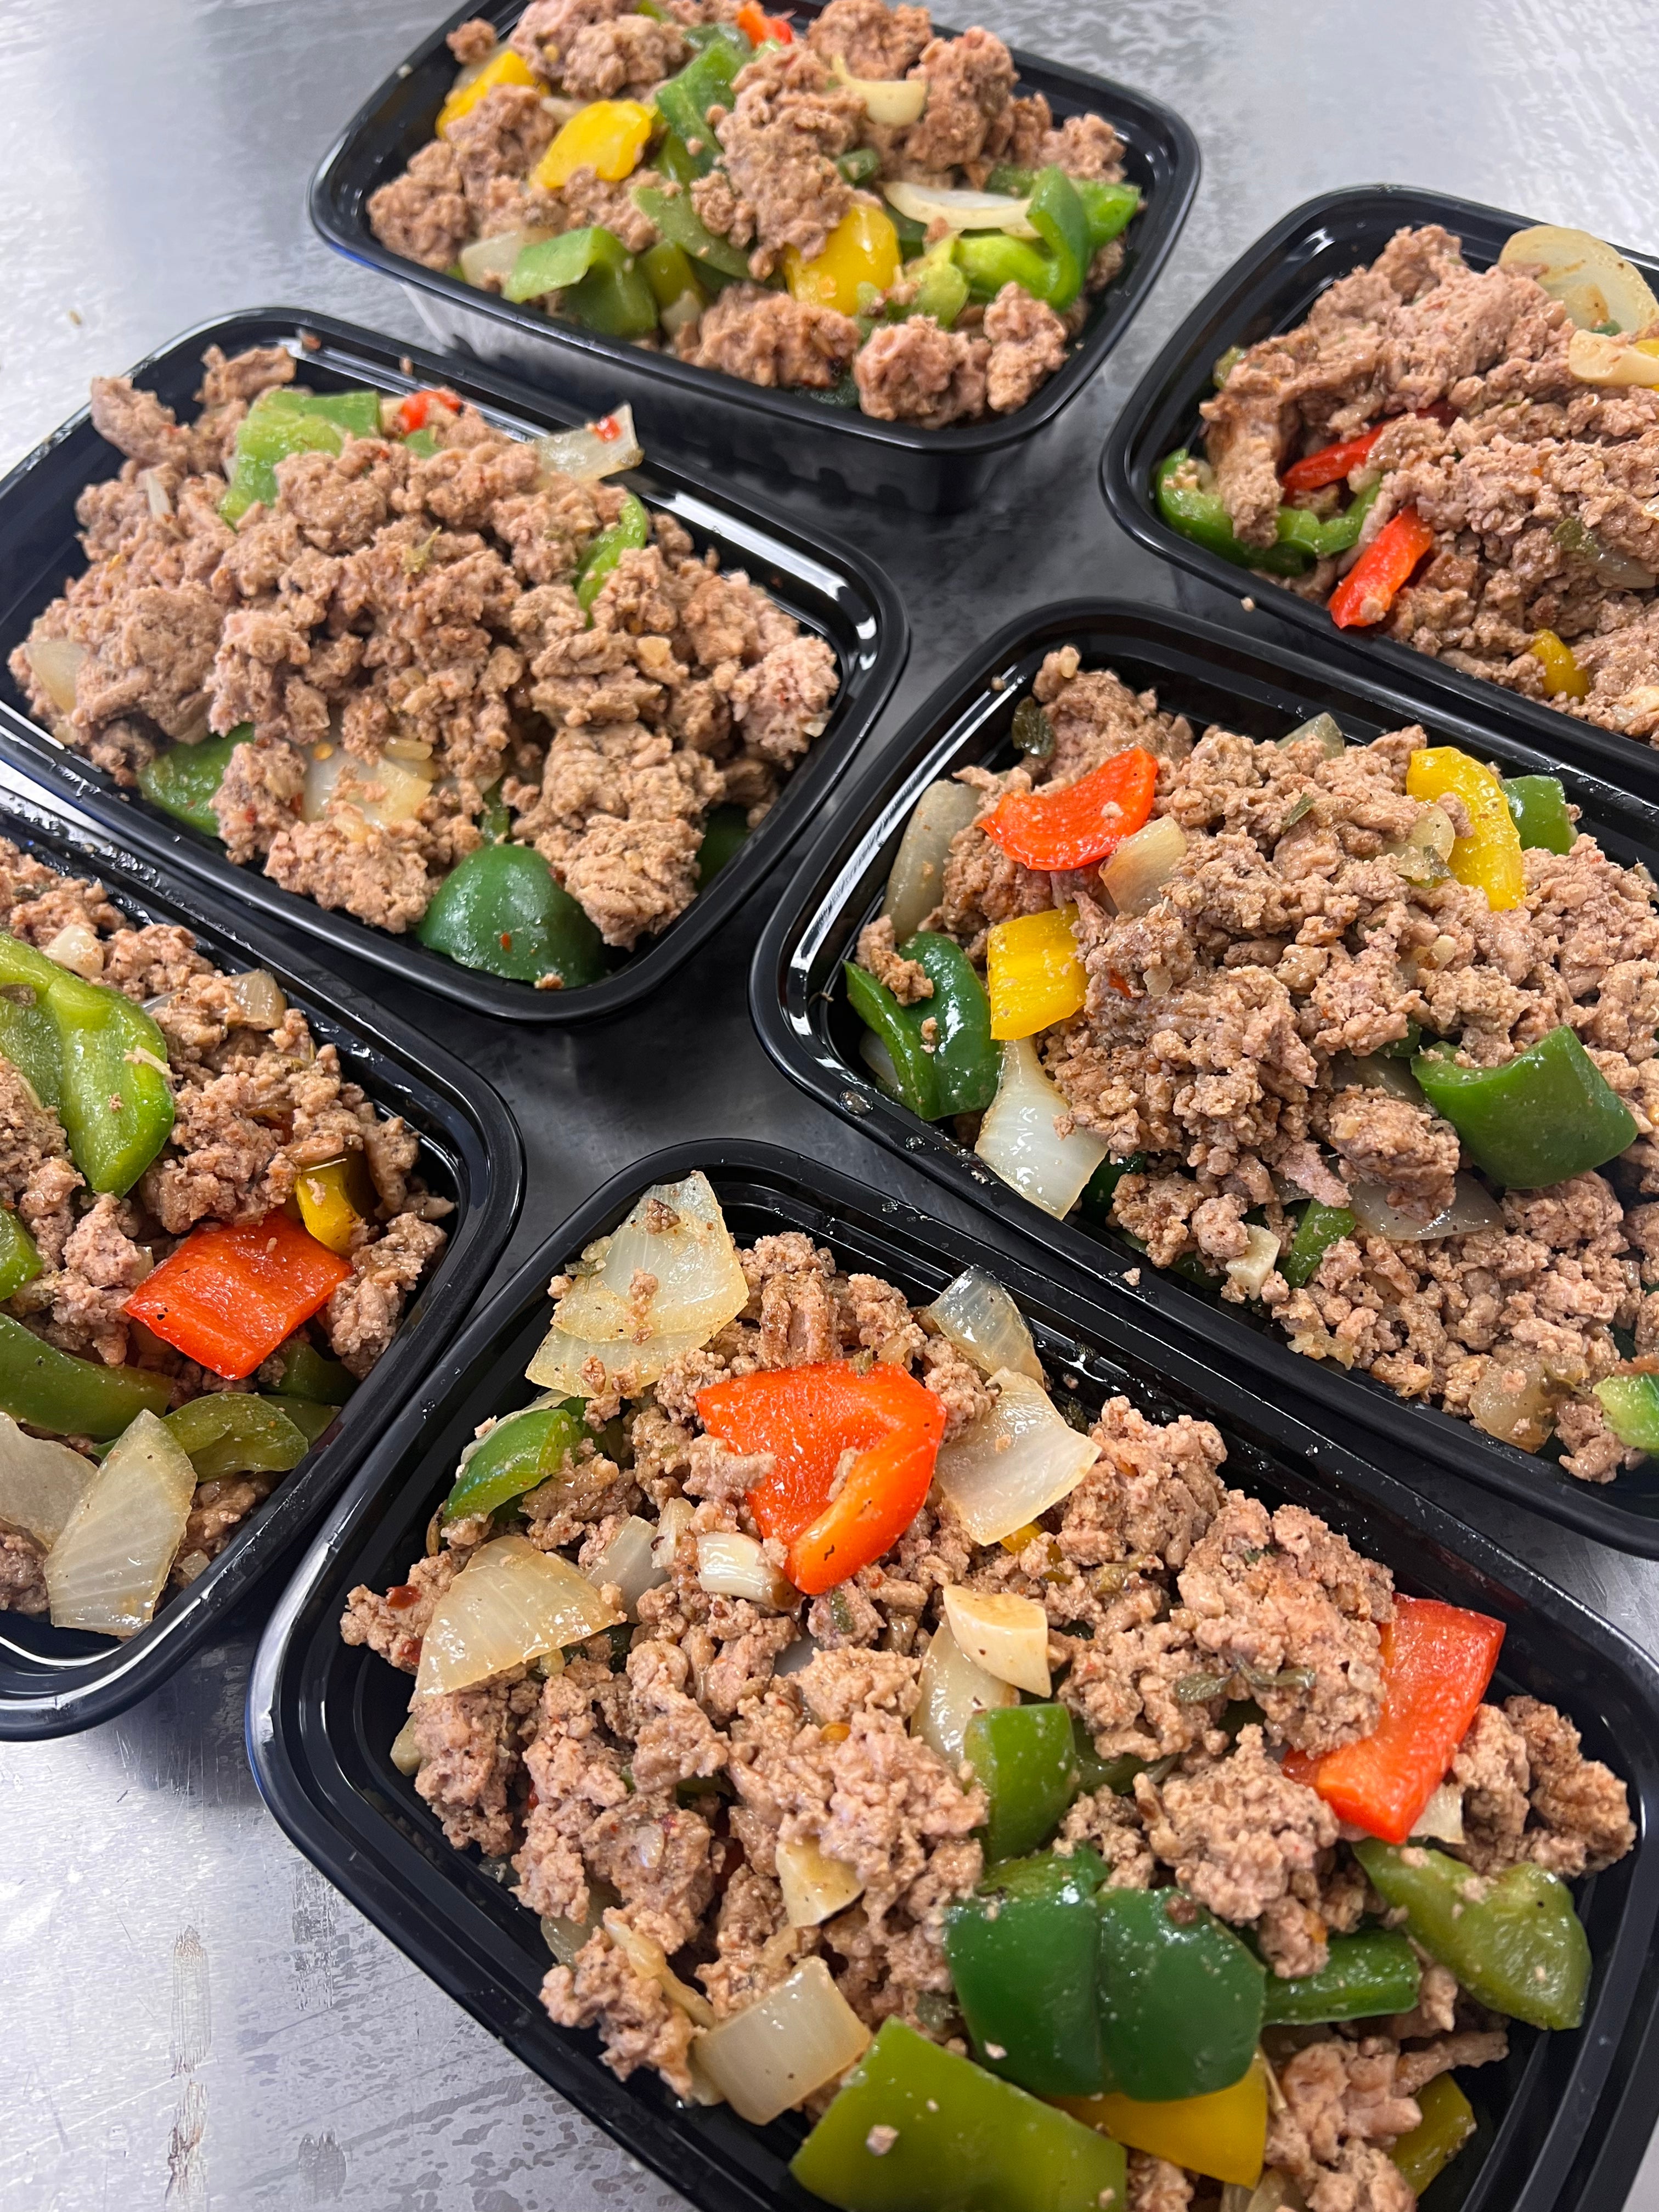 Meal prep professional: What's needed to cook in bulk